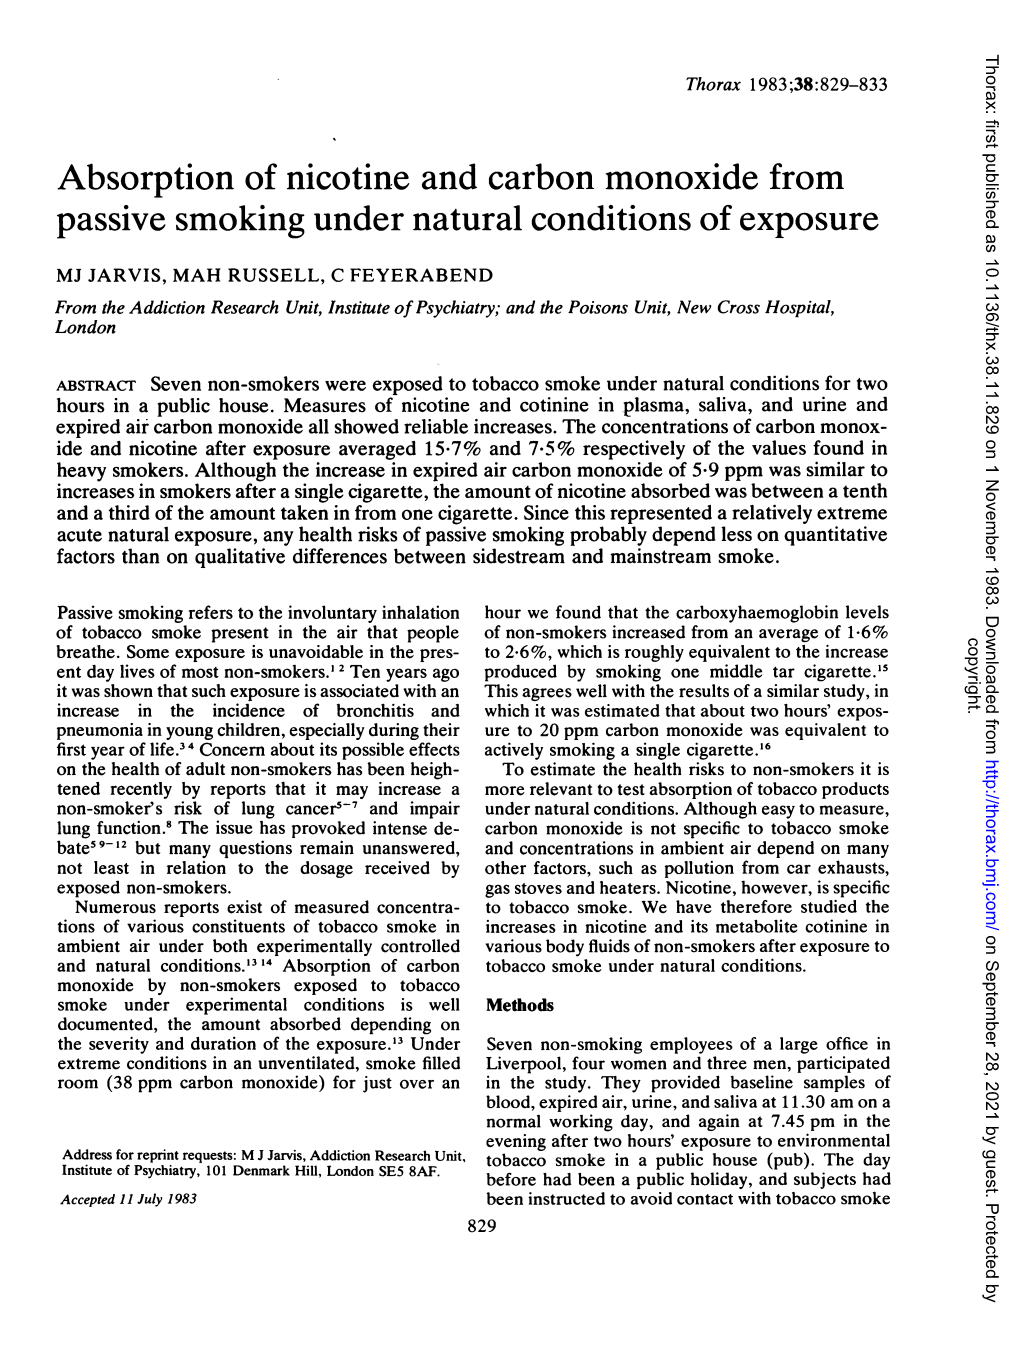 Absorption of Nicotine and Carbon Monoxide from Passive Smoking Under Natural Conditions of Exposure